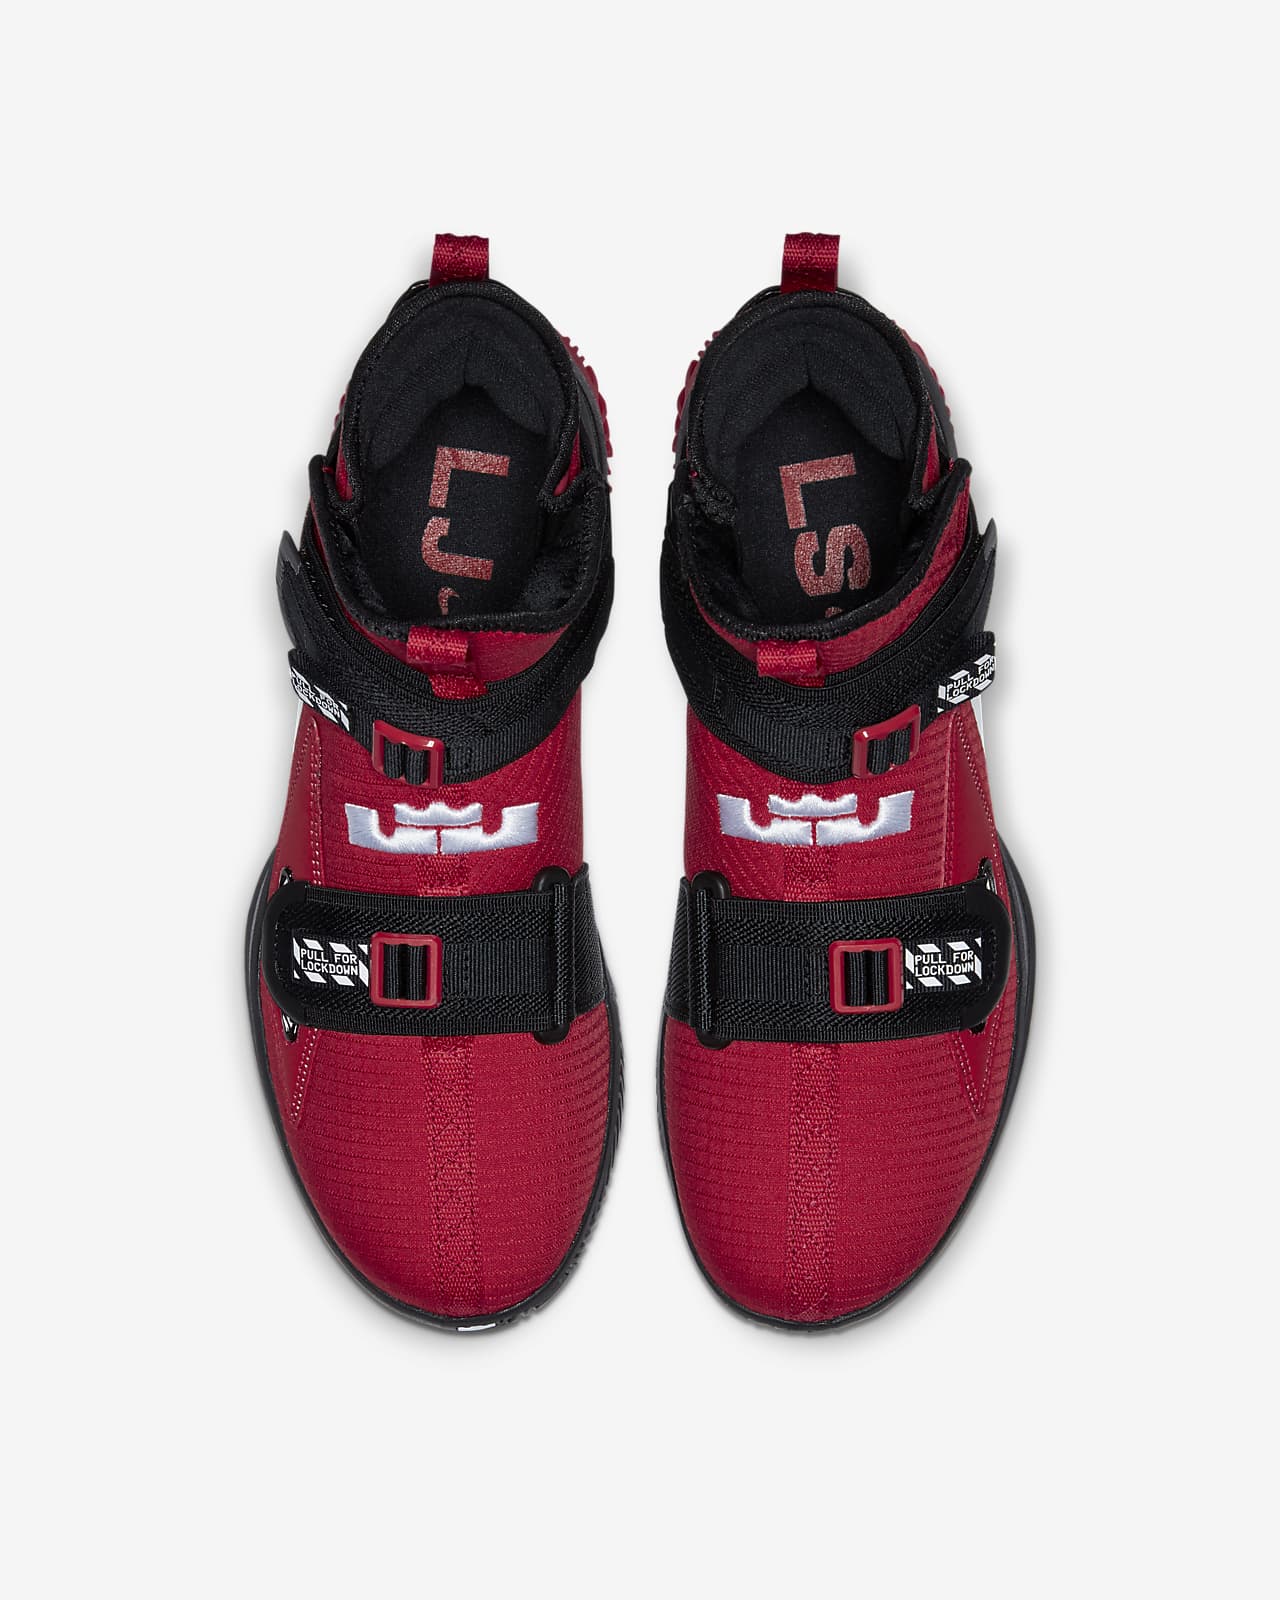 lebron soldier 13 sfg university red